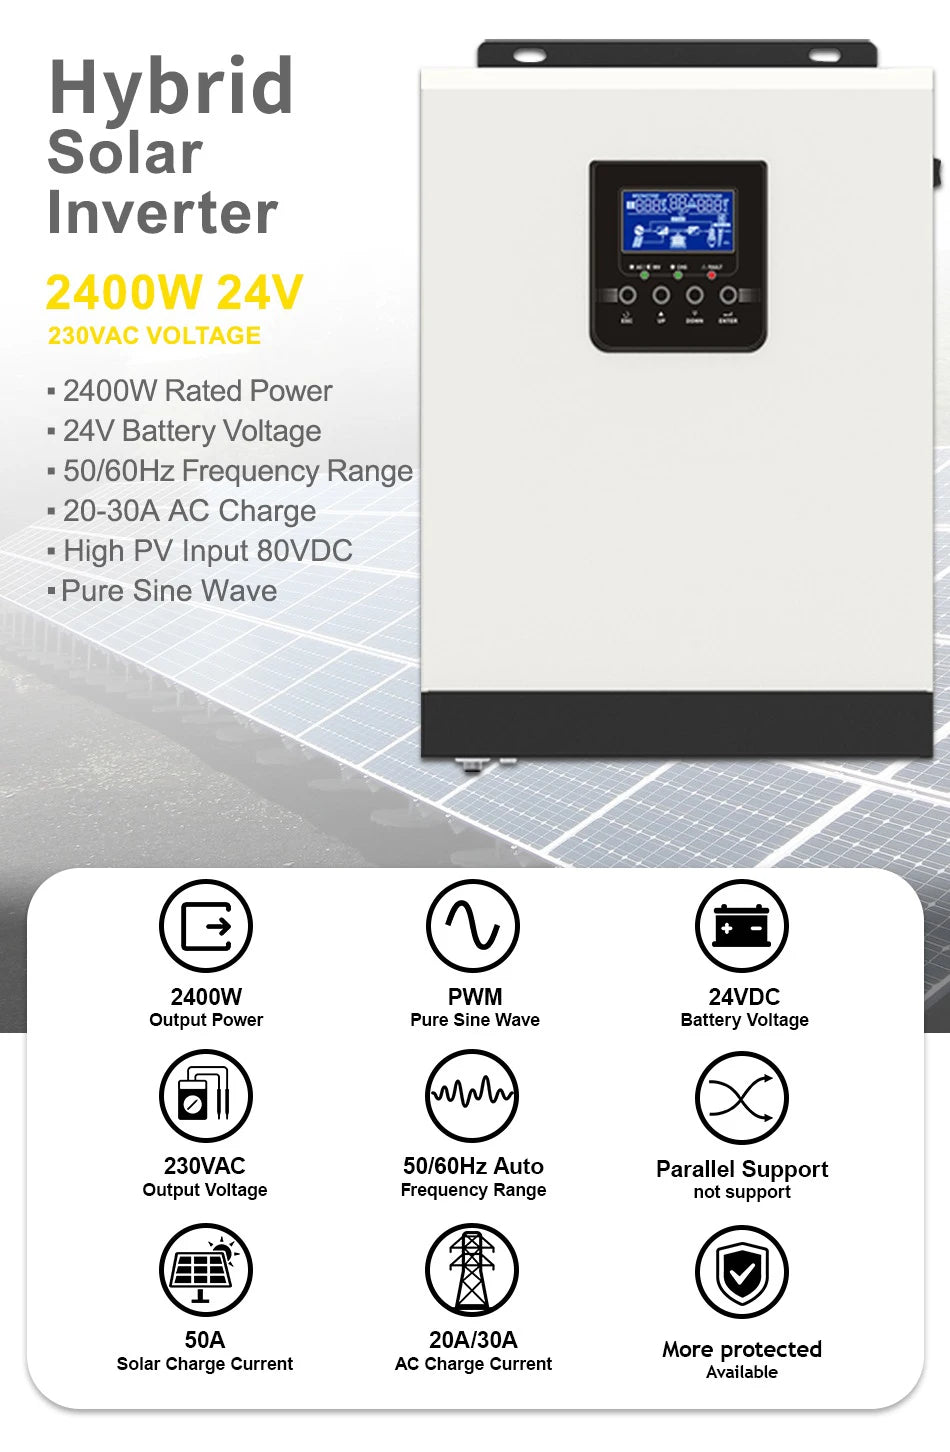 3000VA 2400W Solar Inverter, Solar Inverter with pure sine wave output, 2400W power, and high PV input up to 80VDC.